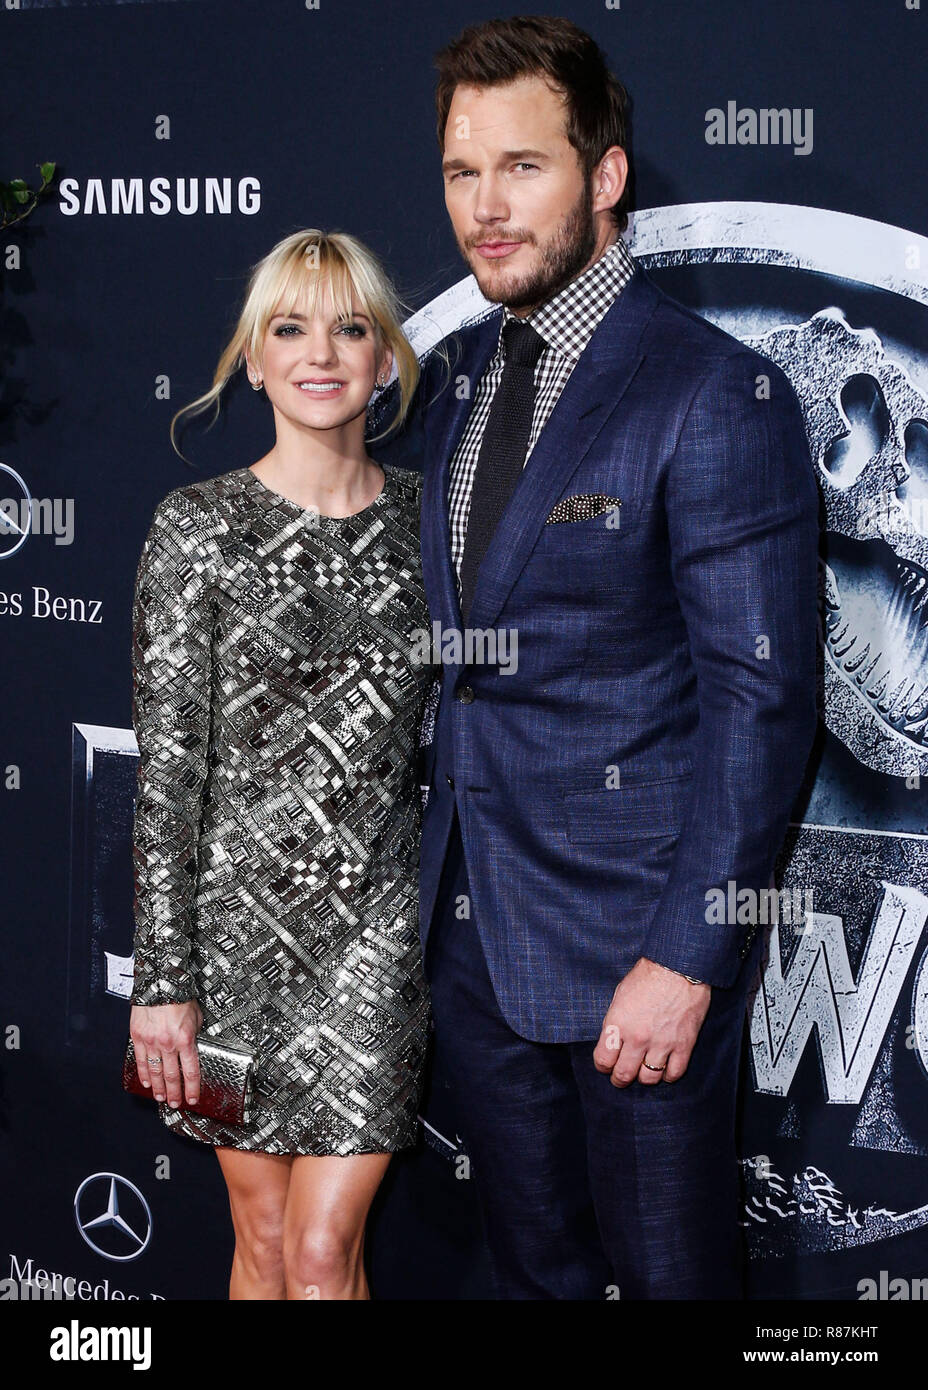 (FILE) Chris Pratt and Anna Faris Divorce Settlement Details Revealed. The details of the divorce settlement between Chris Pratt and Anna Faris are coming to light. The two, who obtained a private judge to work out the deal, reportedly signed off on the deal on Wednesday (November 7, 2018) according to TMZ. According to the documents, they have agreed to live 'no more than five miles apart for about the next five years.' This deal was made so that the two parents stay in place until their six-year-old son, Jack, completes the sixth grade. HOLLYWOOD, LOS ANGELES, CA, USA - JUNE 09: Actors Anna  Stock Photo